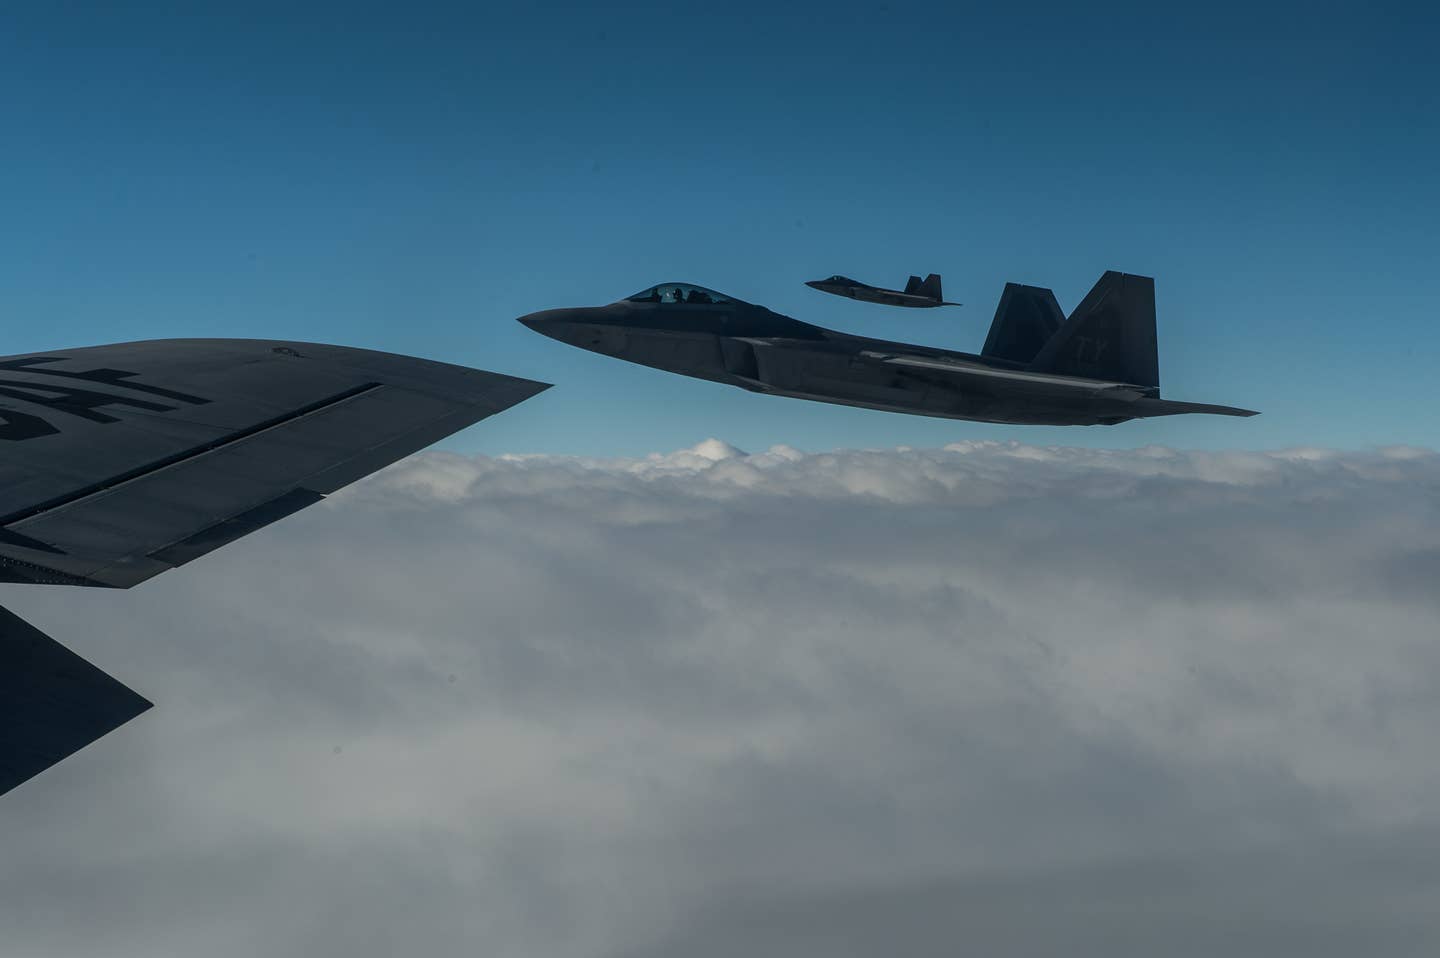 A F-22 Raptors from Tyndall Air Force Base, Fla., fly off the wing of a KC-135 Stratotanker on their way to Iraq, Jan. 30 2015. The F-22s are supporting the U.S. lead coalition against Da'esh. (U.S. Air Force Photo by Staff Sgt. Perry Aston/Released)